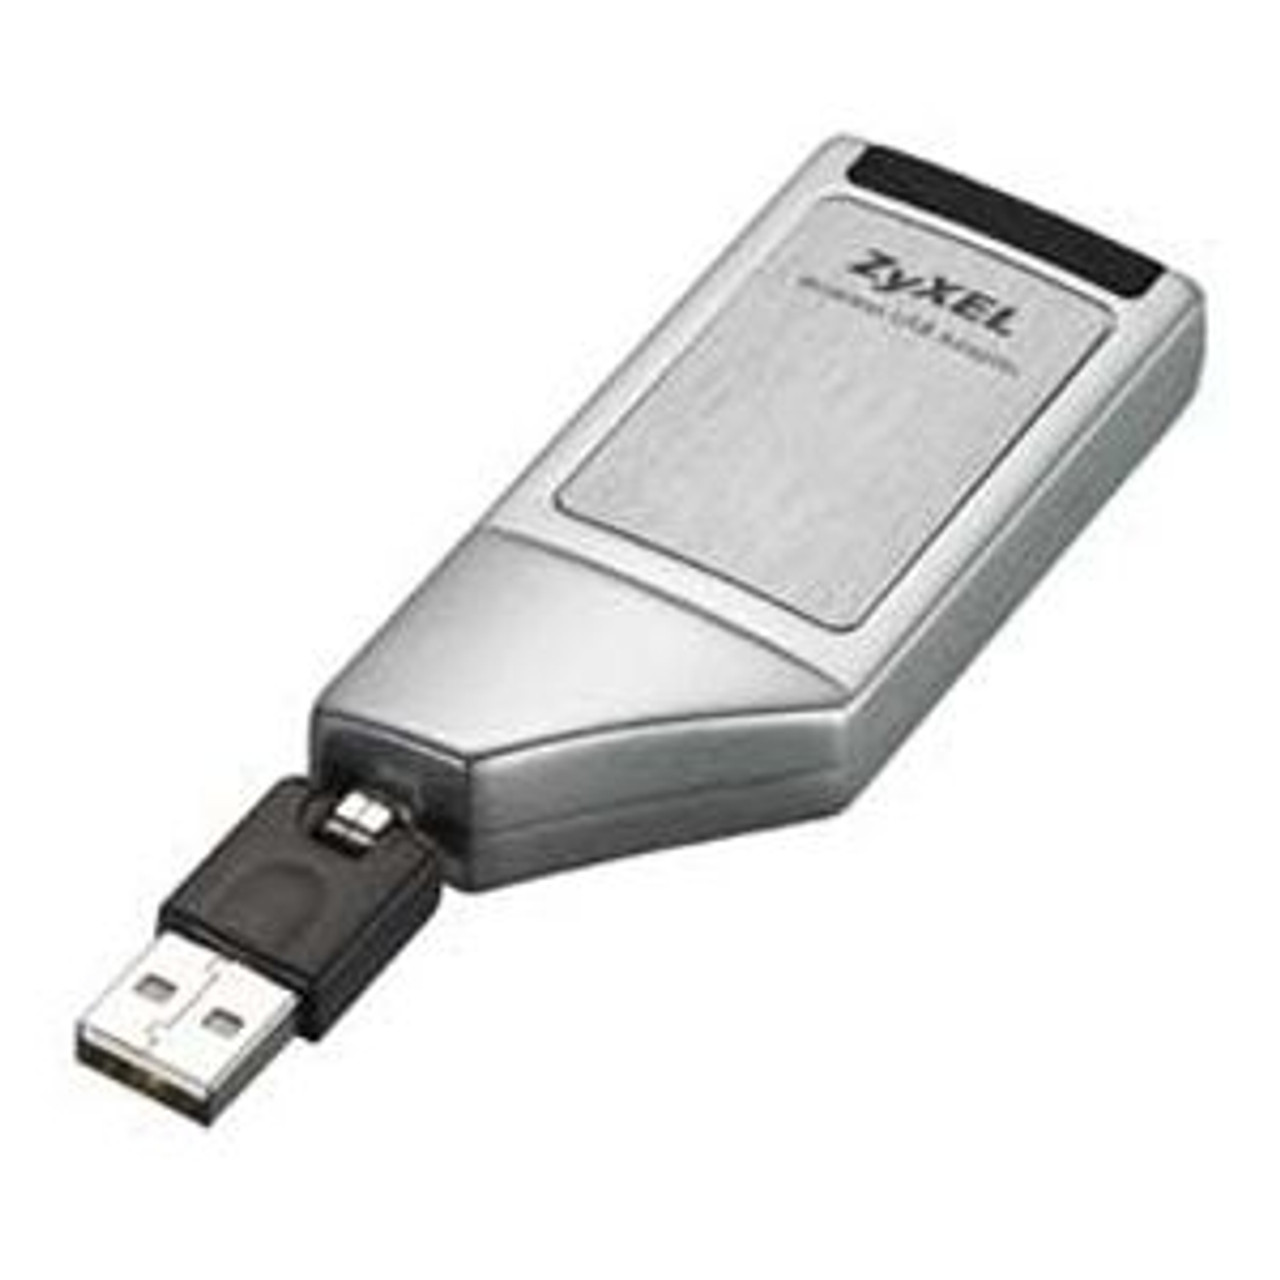 Zyxel G-210H High Power Wireless Adapter USB 54Mbps